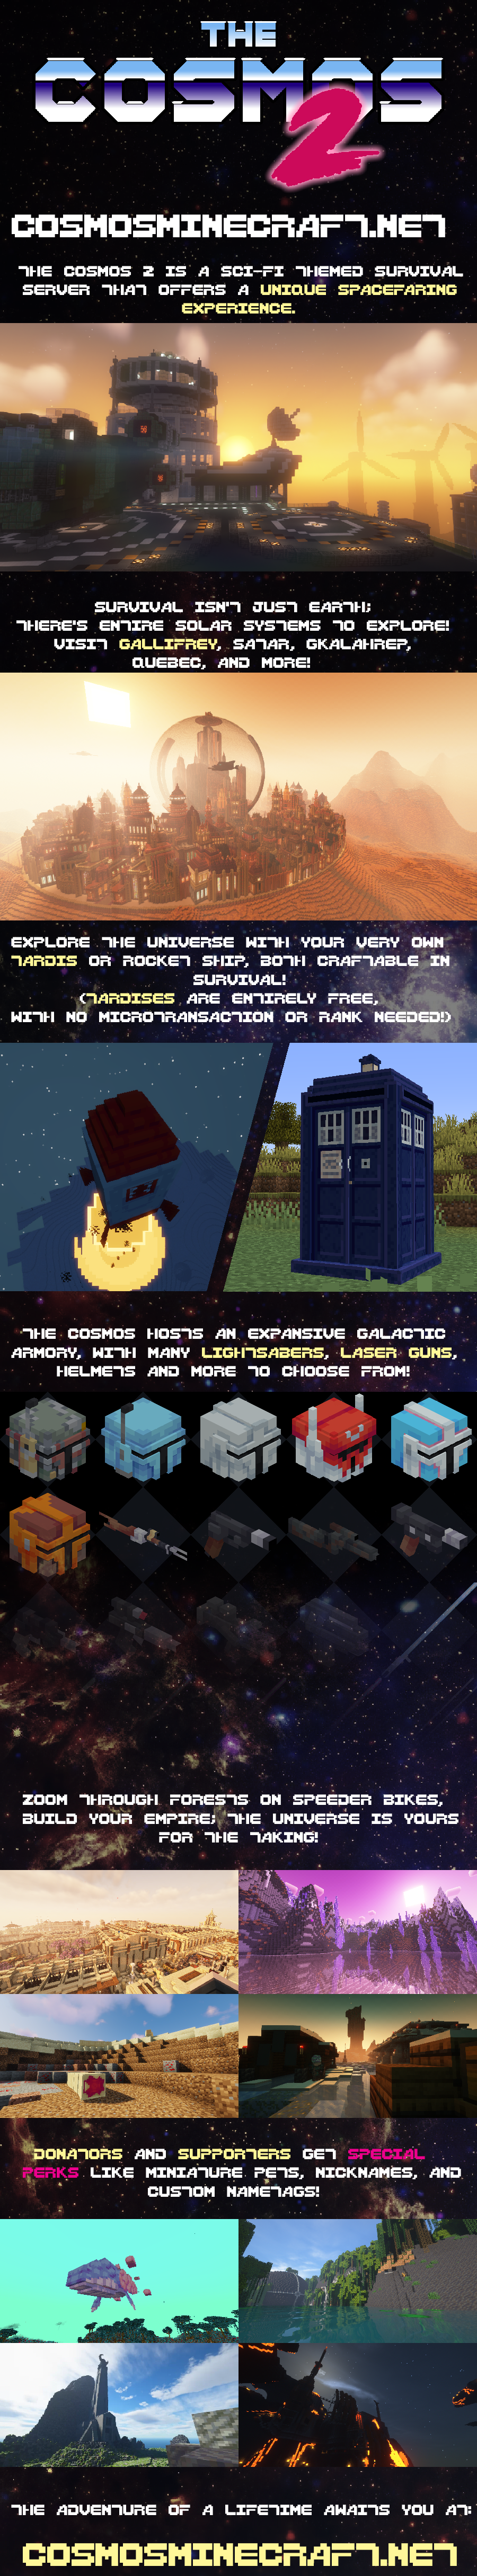 The Cosmos 2 | Space Survival | Free TARDIS | Spaceships, Aliens, Planets, and Lore | Minecraft Server